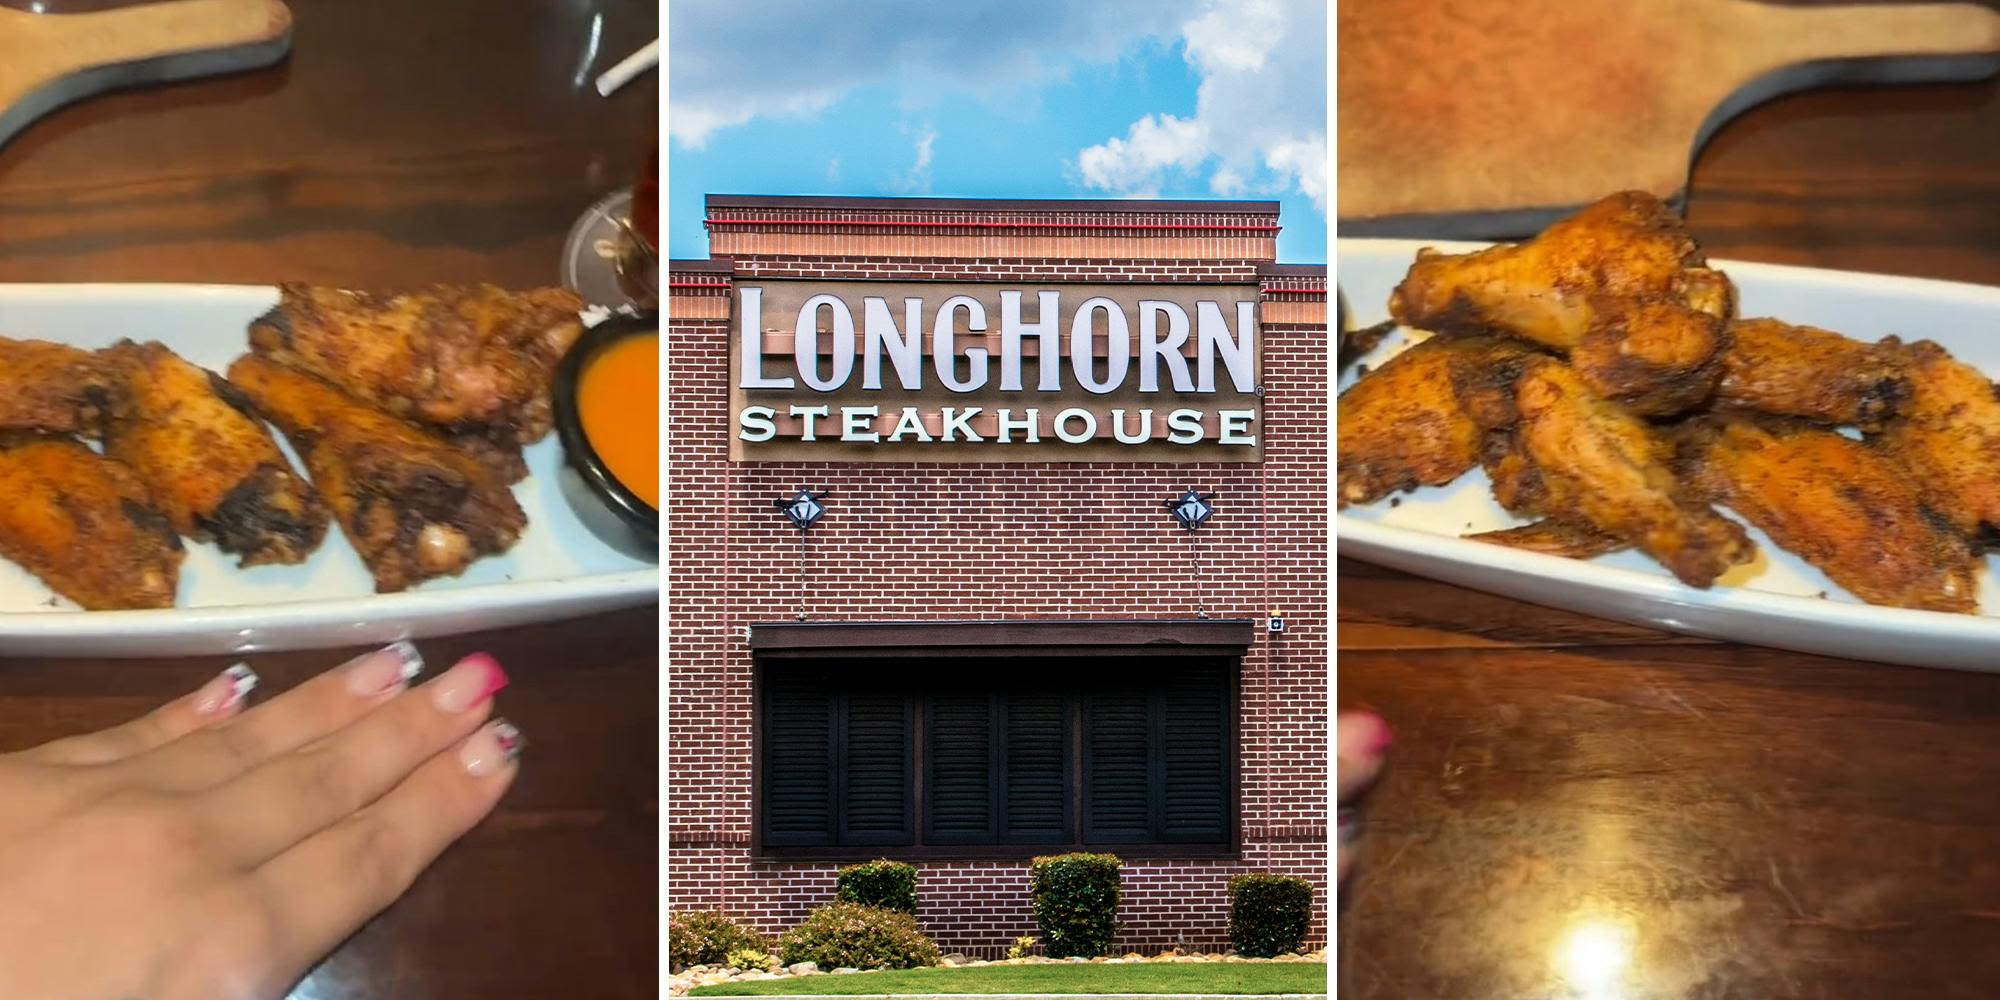 ‘This is genius’: Woman shares how to get the most bang for your buck at Longhorn Steakhouse